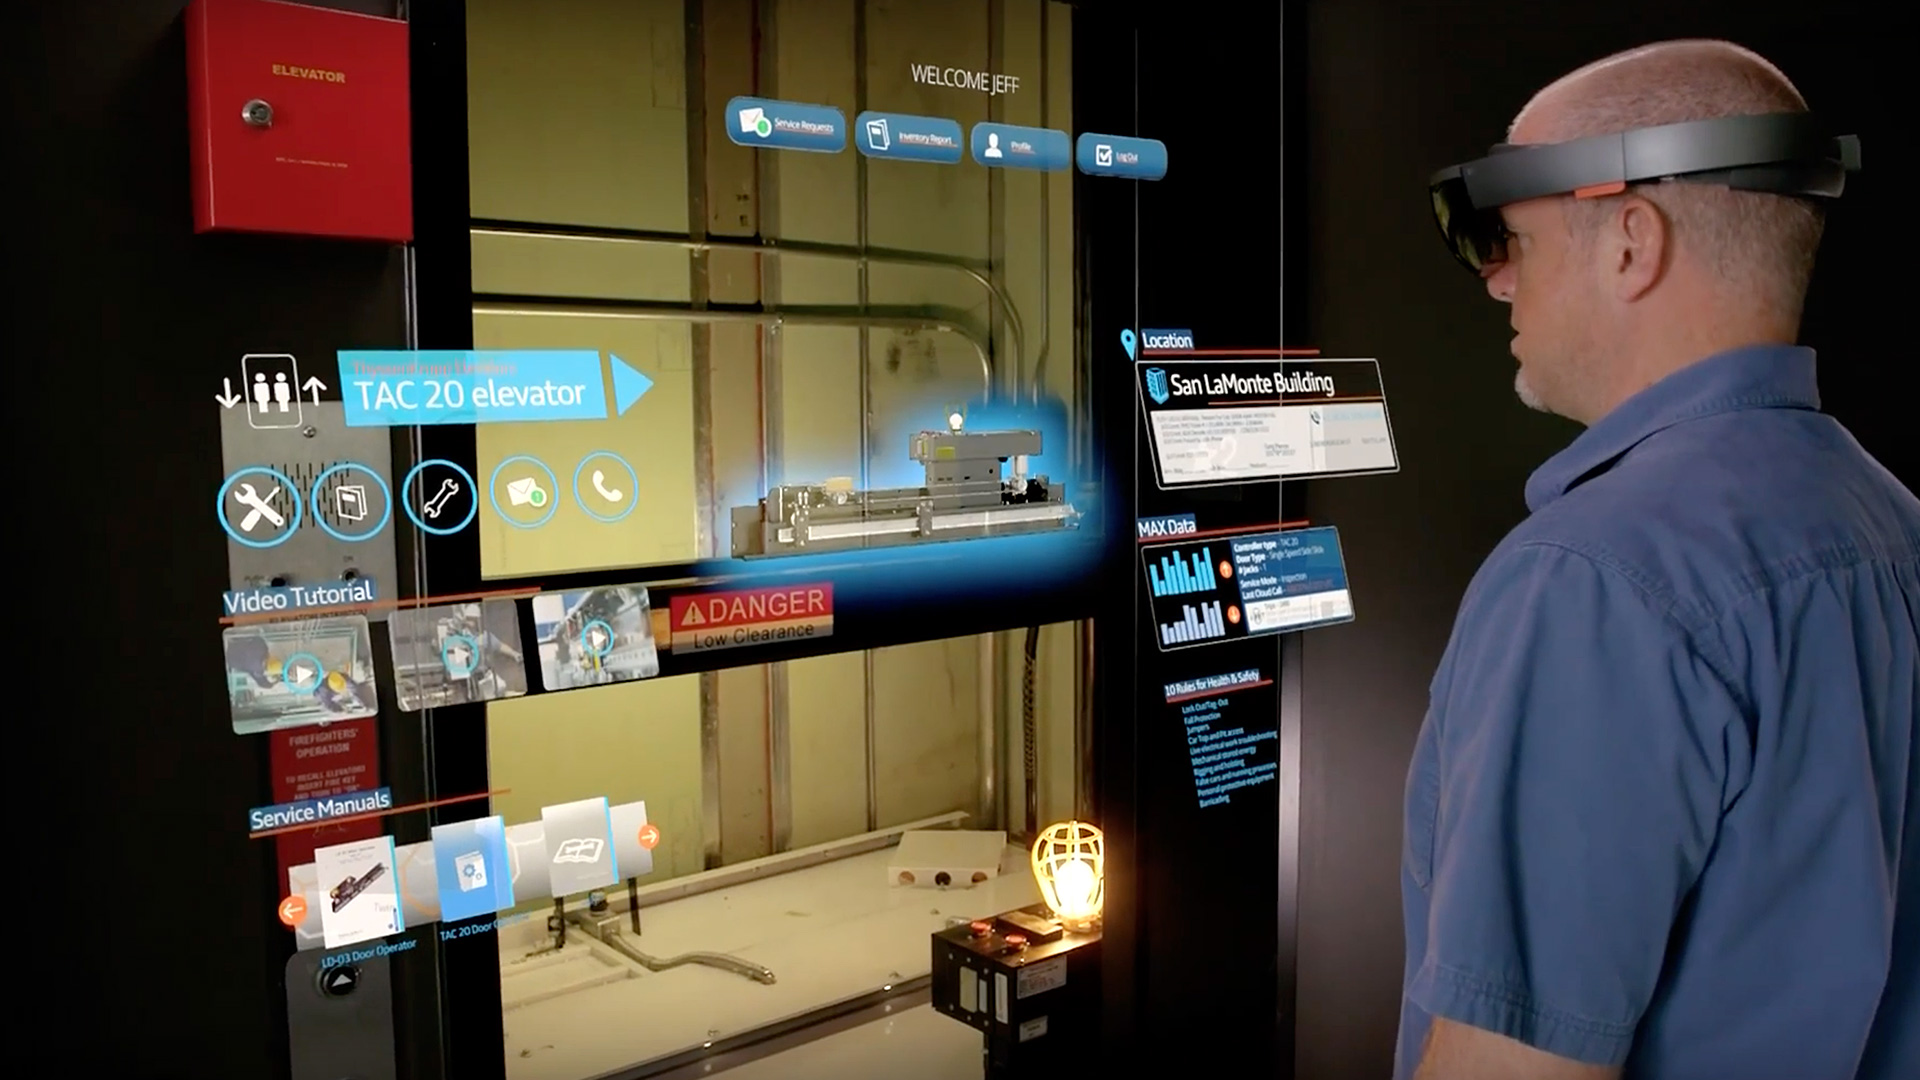 Thyssenkrupp AG - Mixed Reality with HoloLens